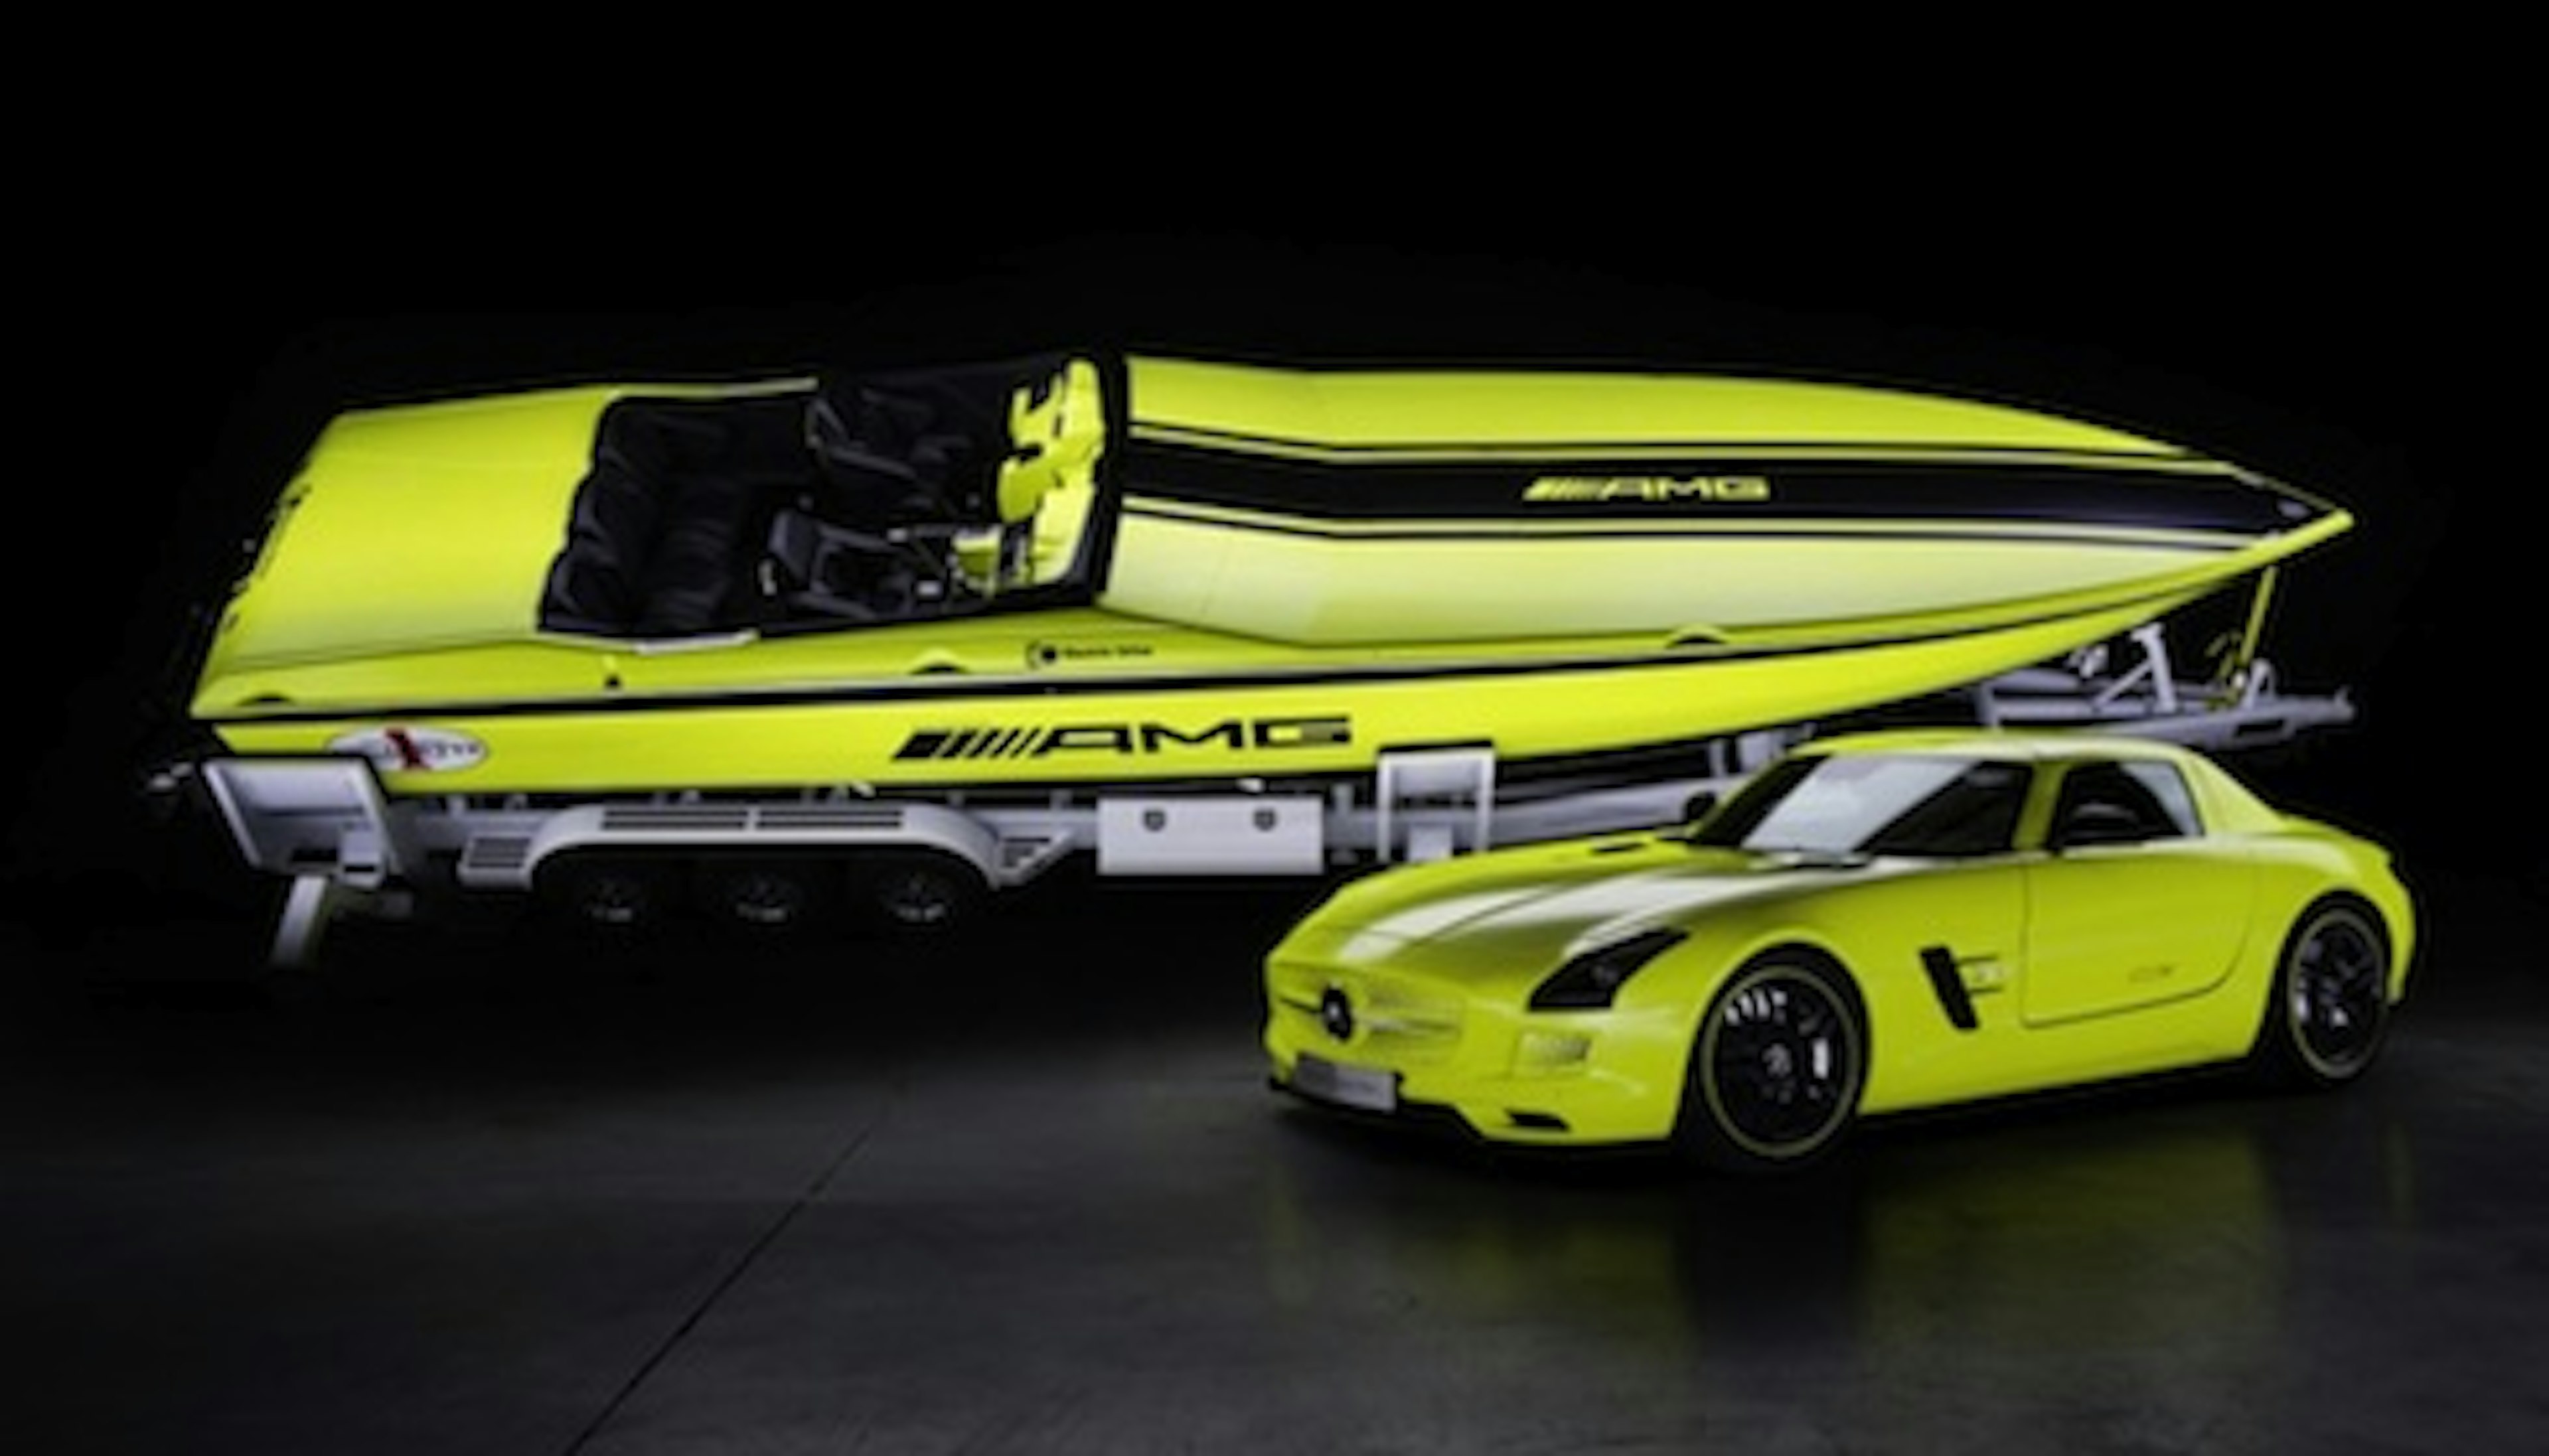 cigarette-amg-electric-drive-boat-concept-inspired-by-the-mercedes-benz-sls-amg-electric-drive artikel